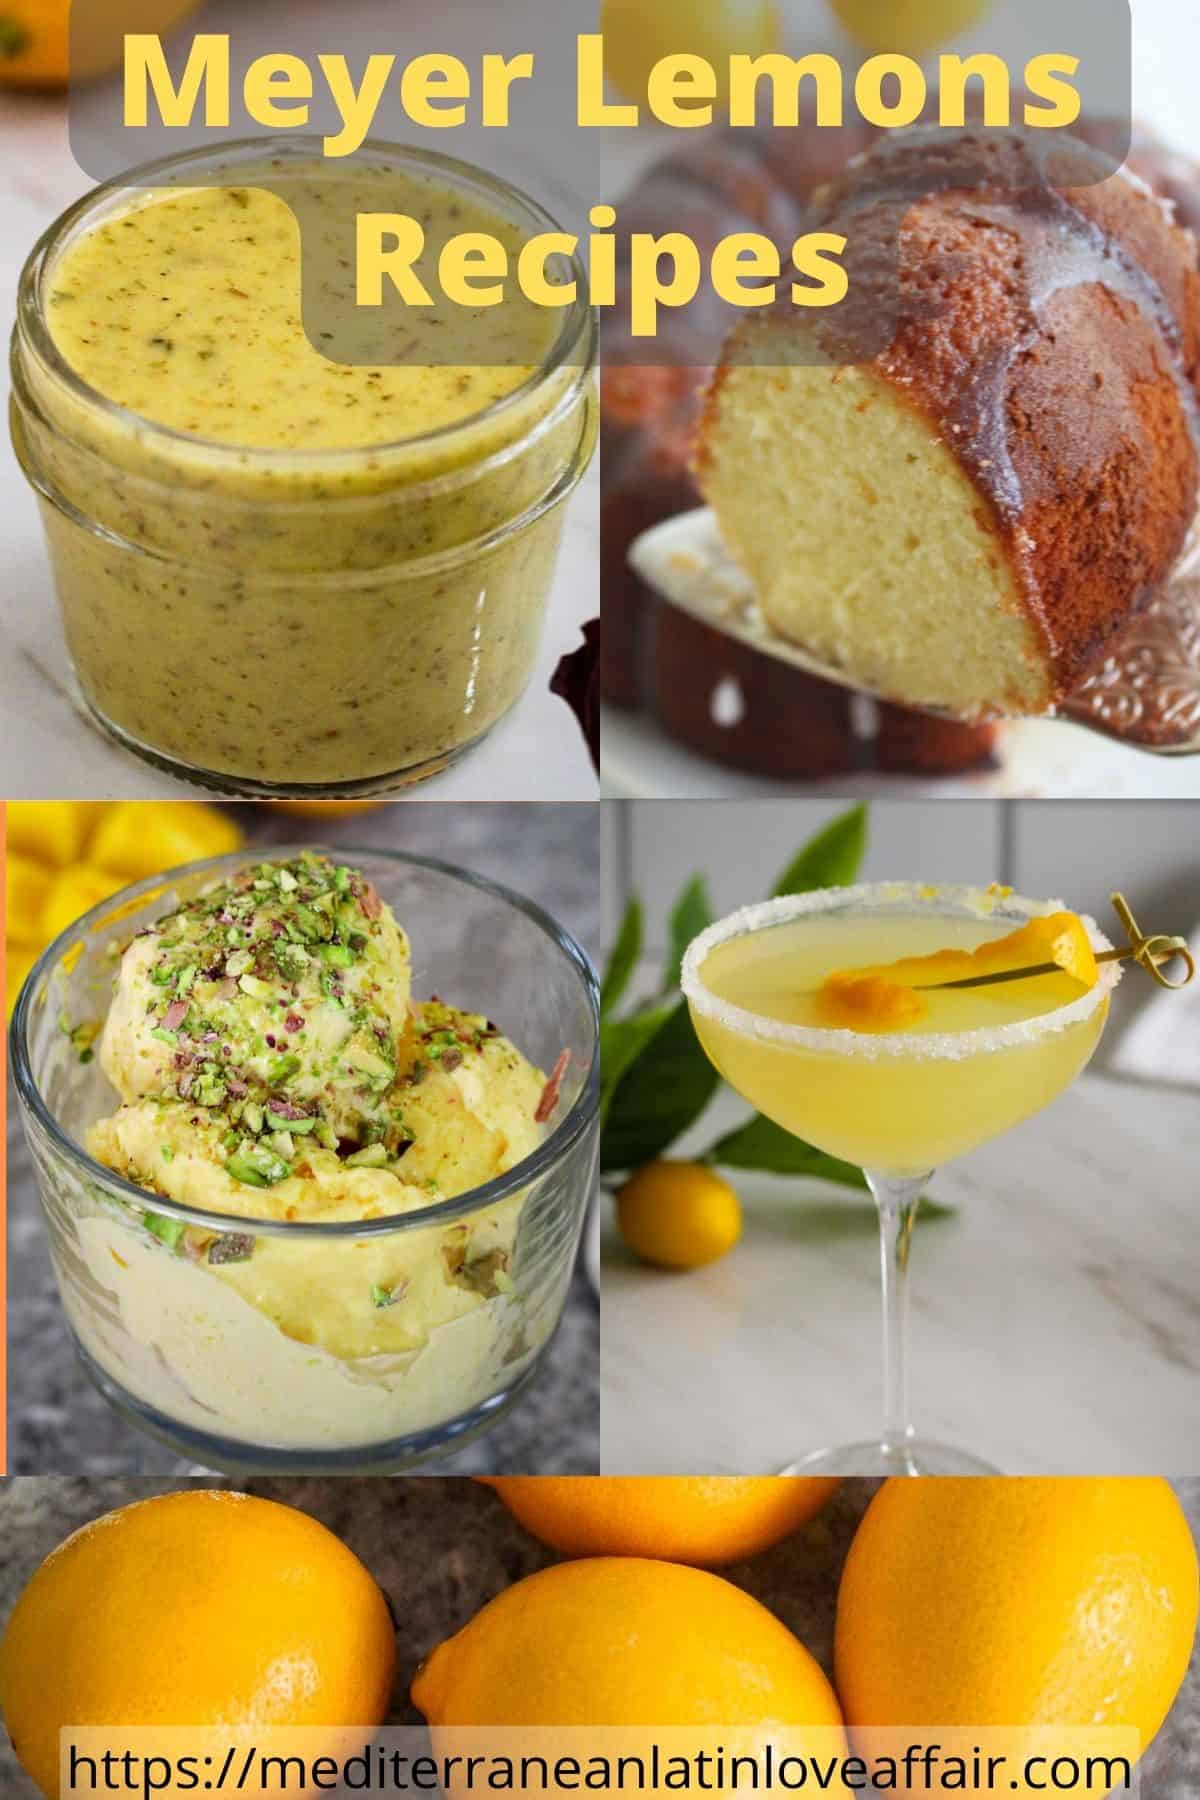 A collage of pictures prepared for Pinterest. It shows pictures of Meyer lemons and recipes made with Meyer lemons like cake, gelato, cocktail, salad dressing etc. There's a title bar on top and a website link at the bottom.